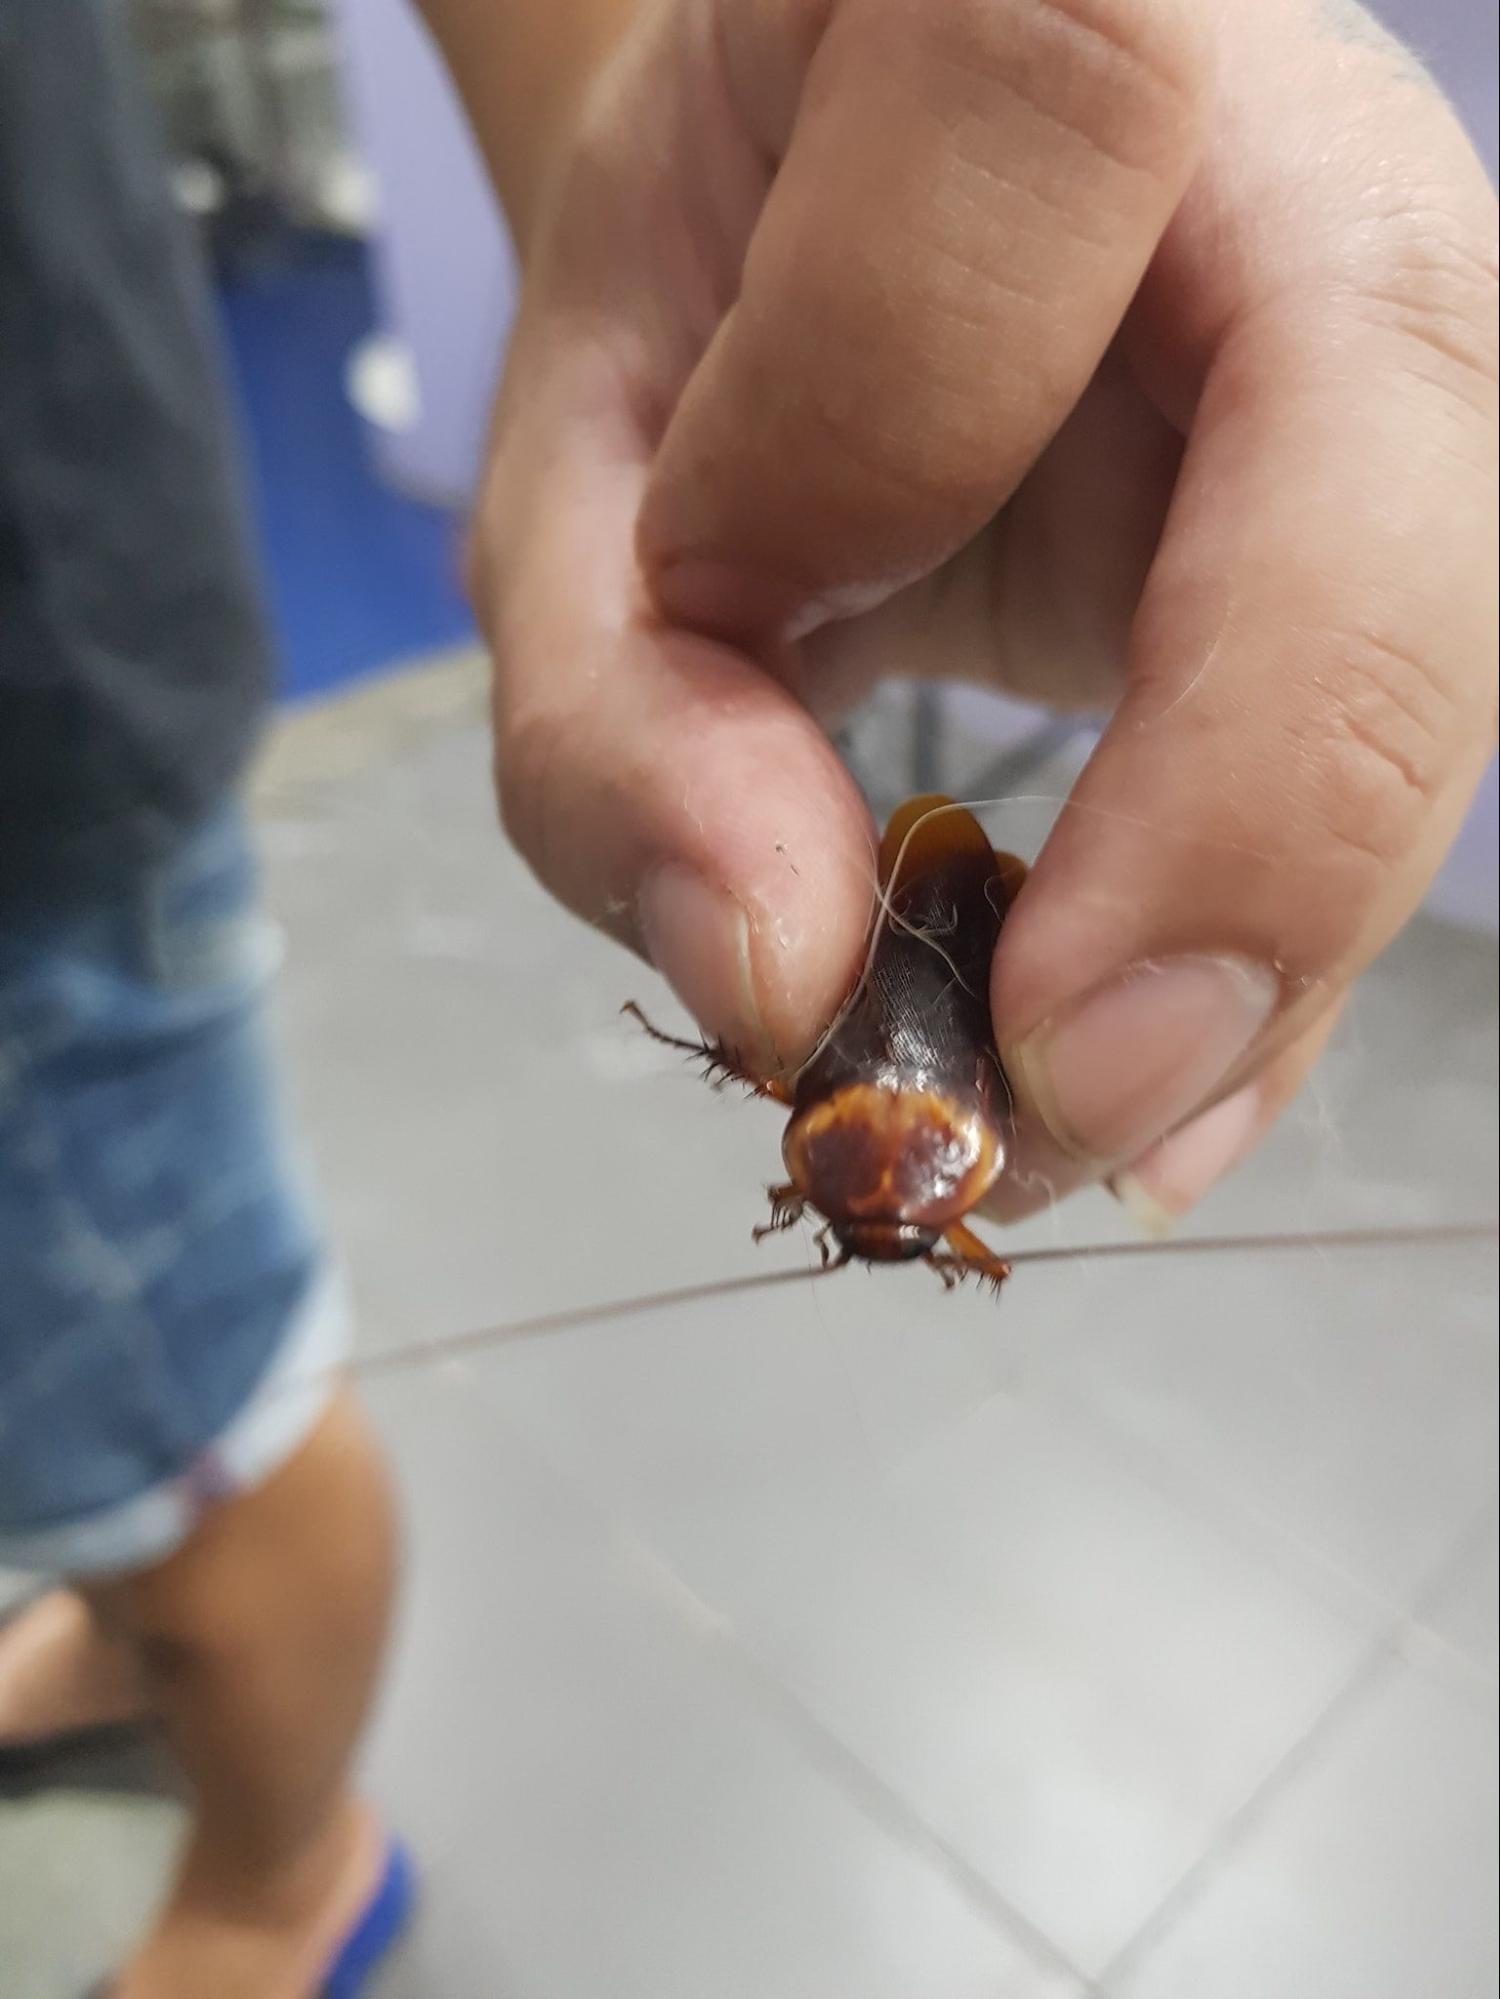 Thai Vet Revives An Injured Cockroach, Oxygen Chamber Used In Emergency Rescue